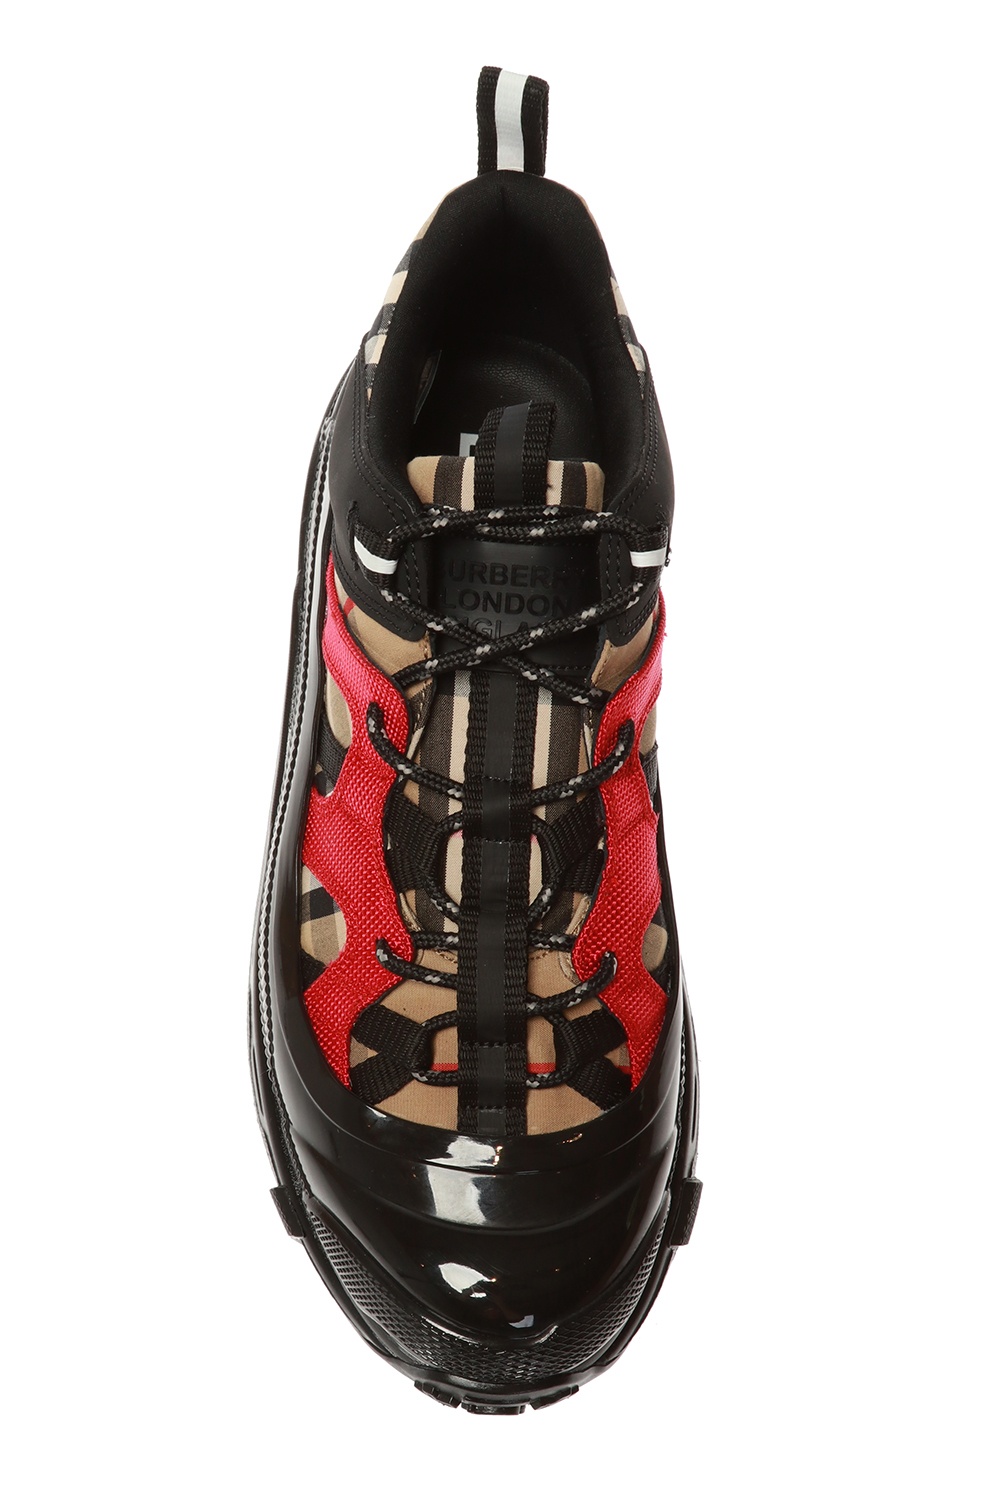 burberry Check 'Arthur' sneakers